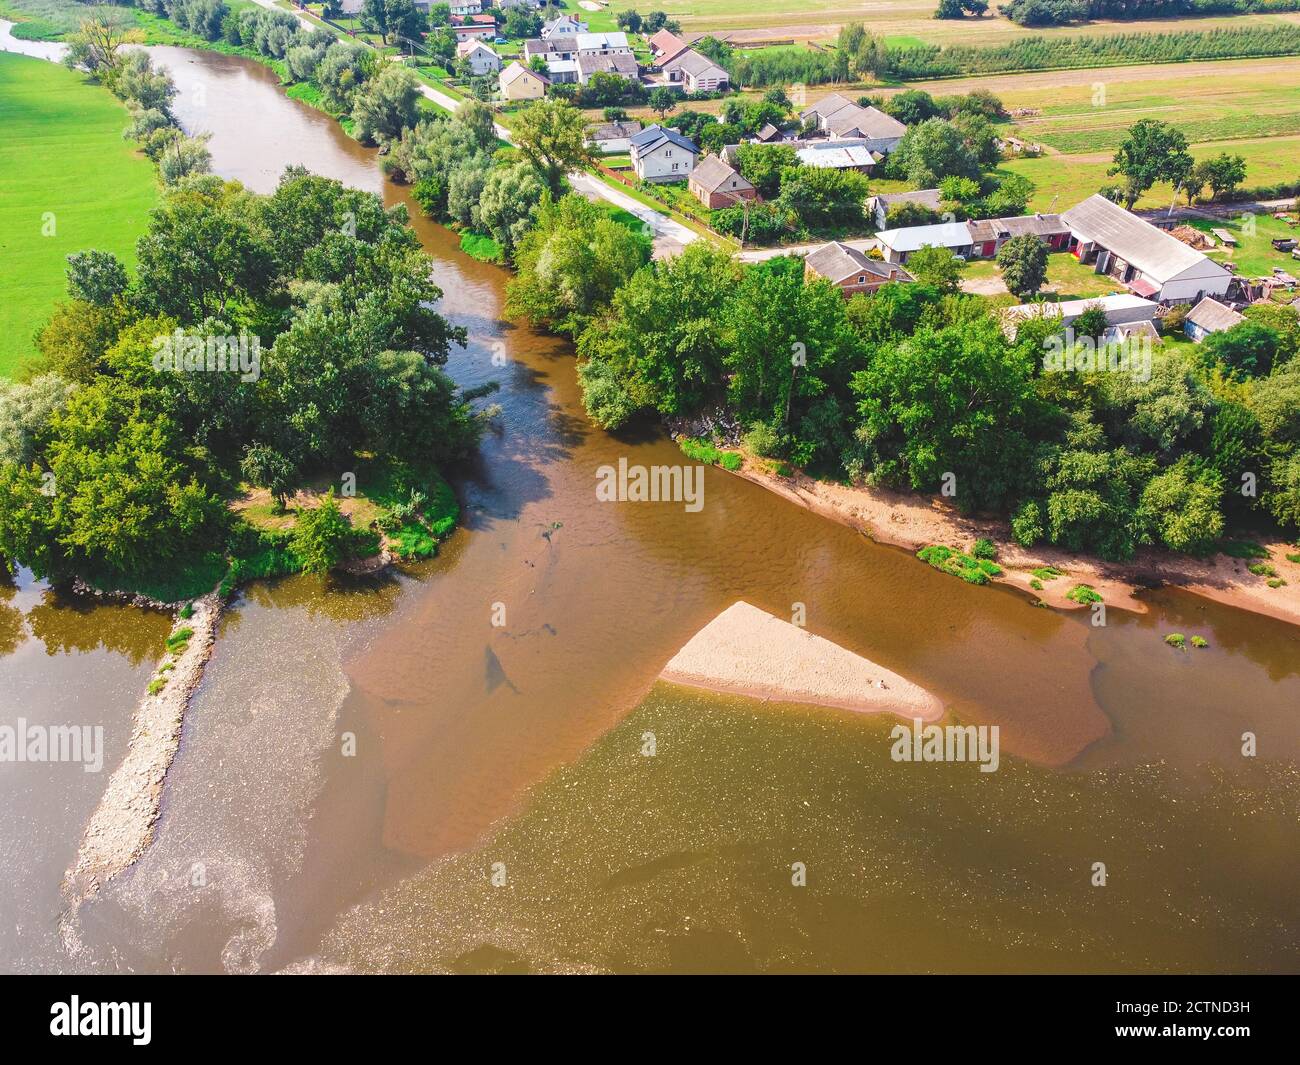 Junction of the rivers. Tributary of of large river surrounded by tress. Drone, aerial view Stock Photo